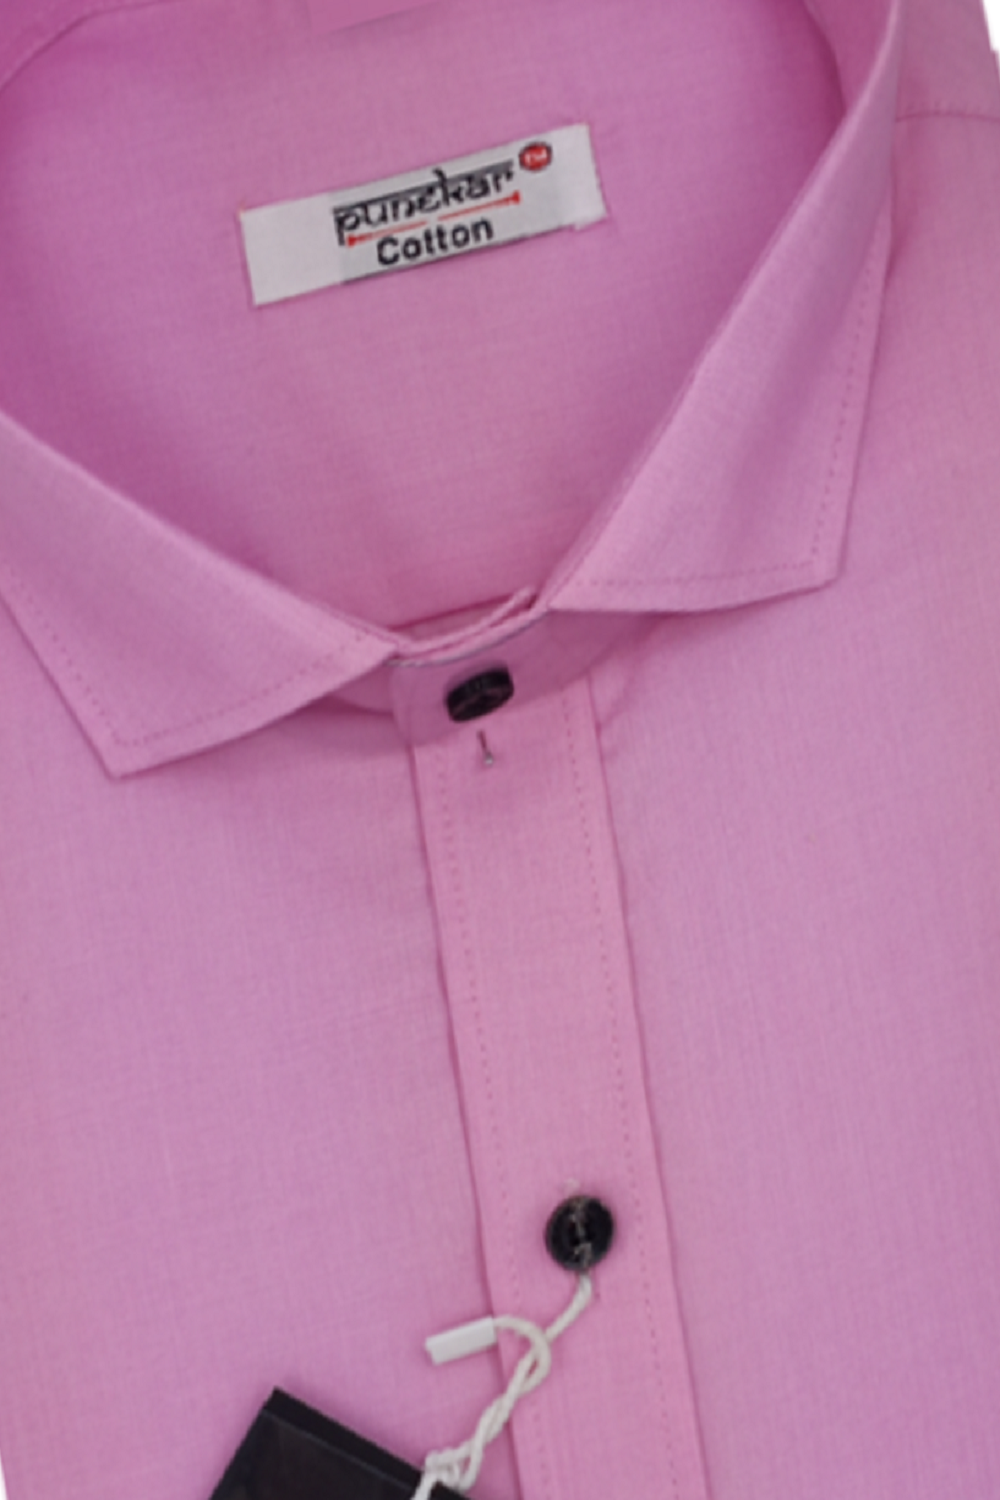 Cotton Tanmay Satin Pink Color Full Sleeves Formal Shirt for Men's